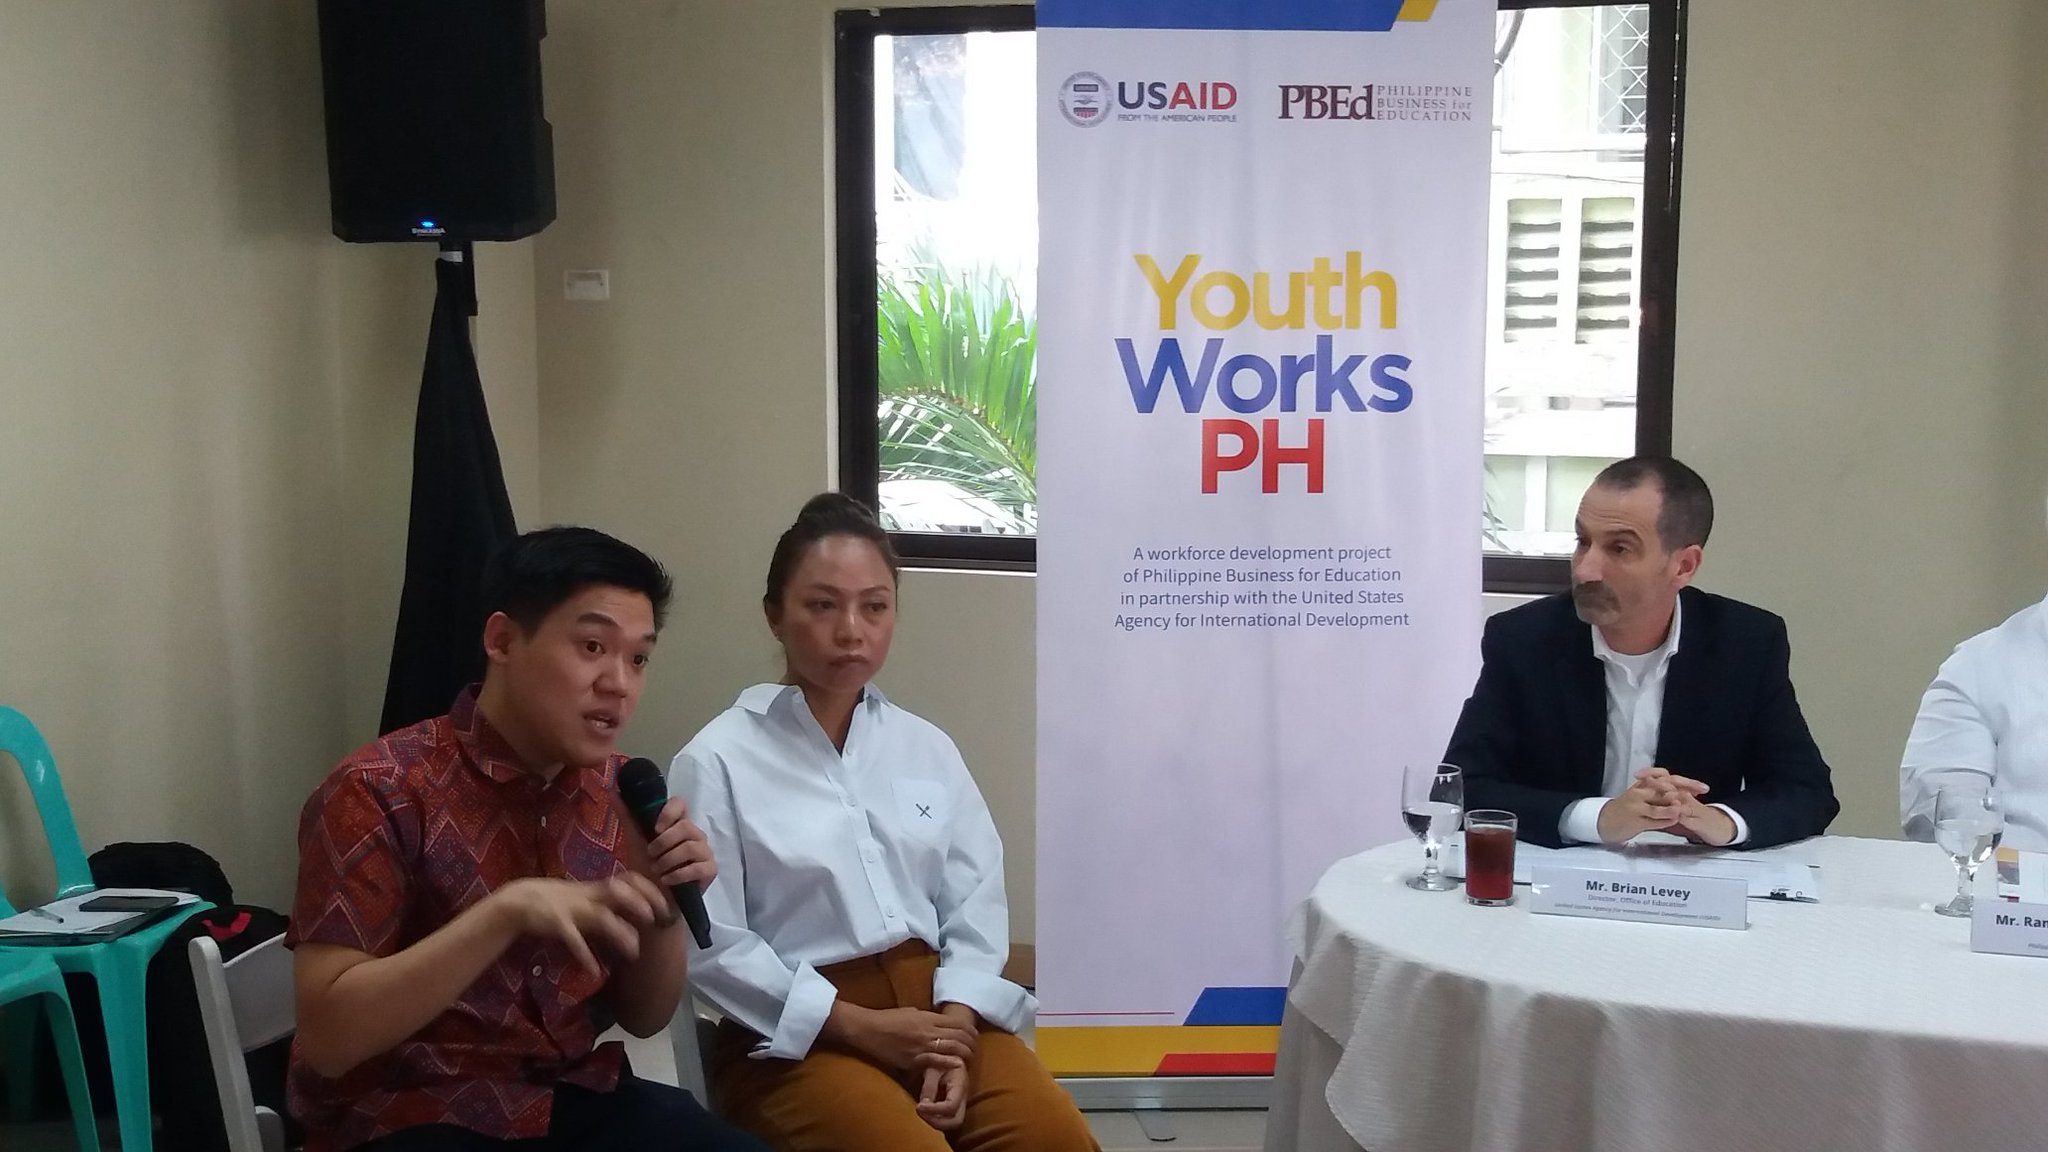 YouthWorks PH bridges youth skills from school to work